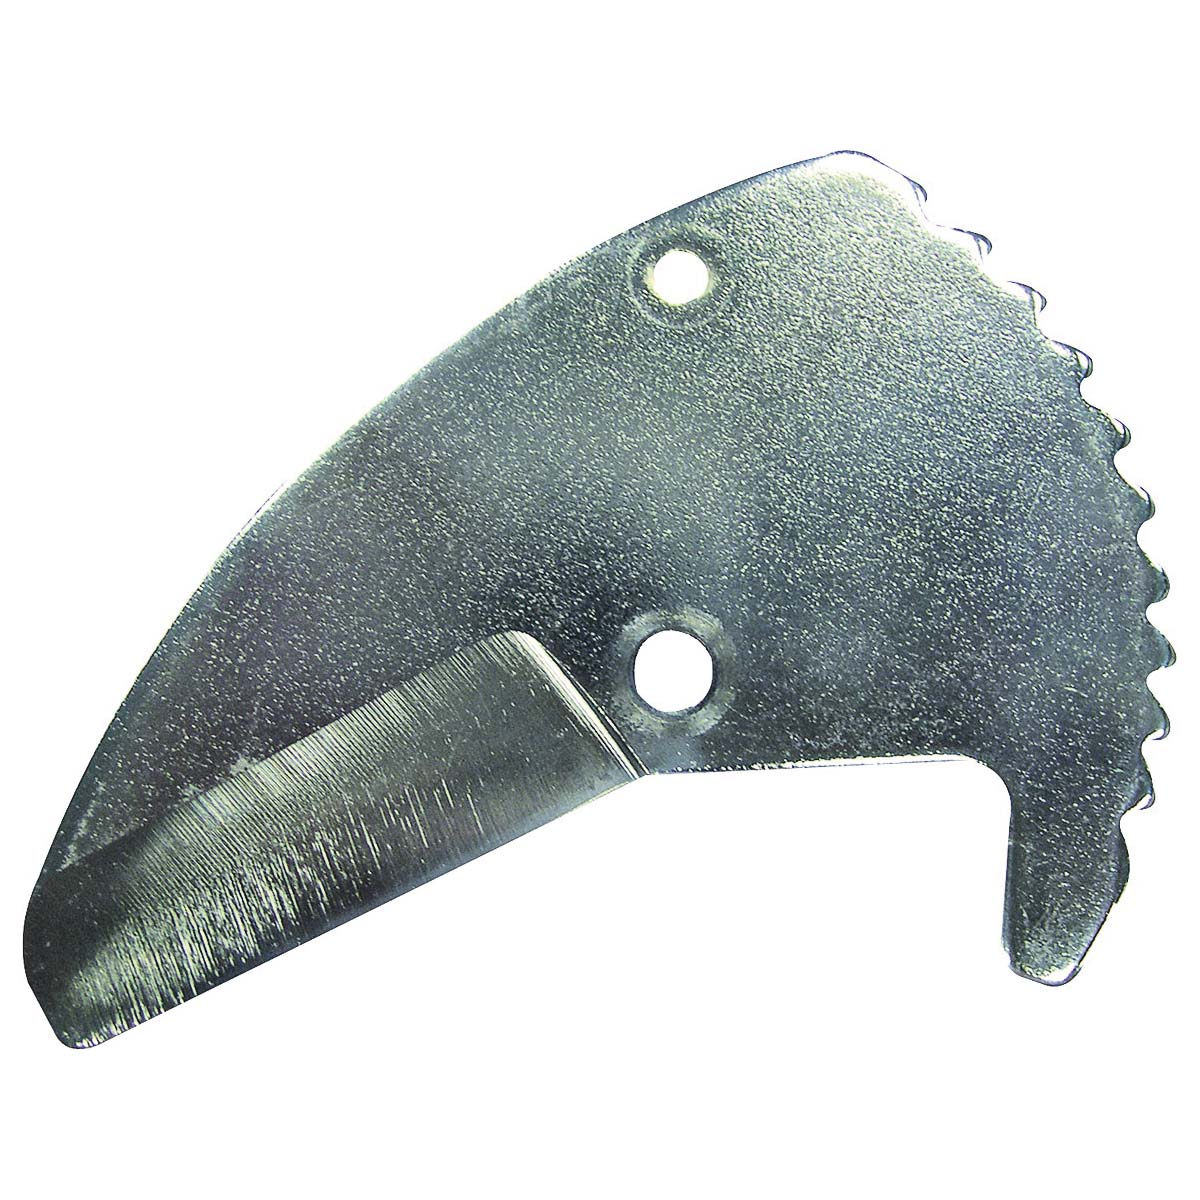 PE-42-S-B-3L Cutter Blade, 2.5 mm Thick, Steel, Nickel Plated